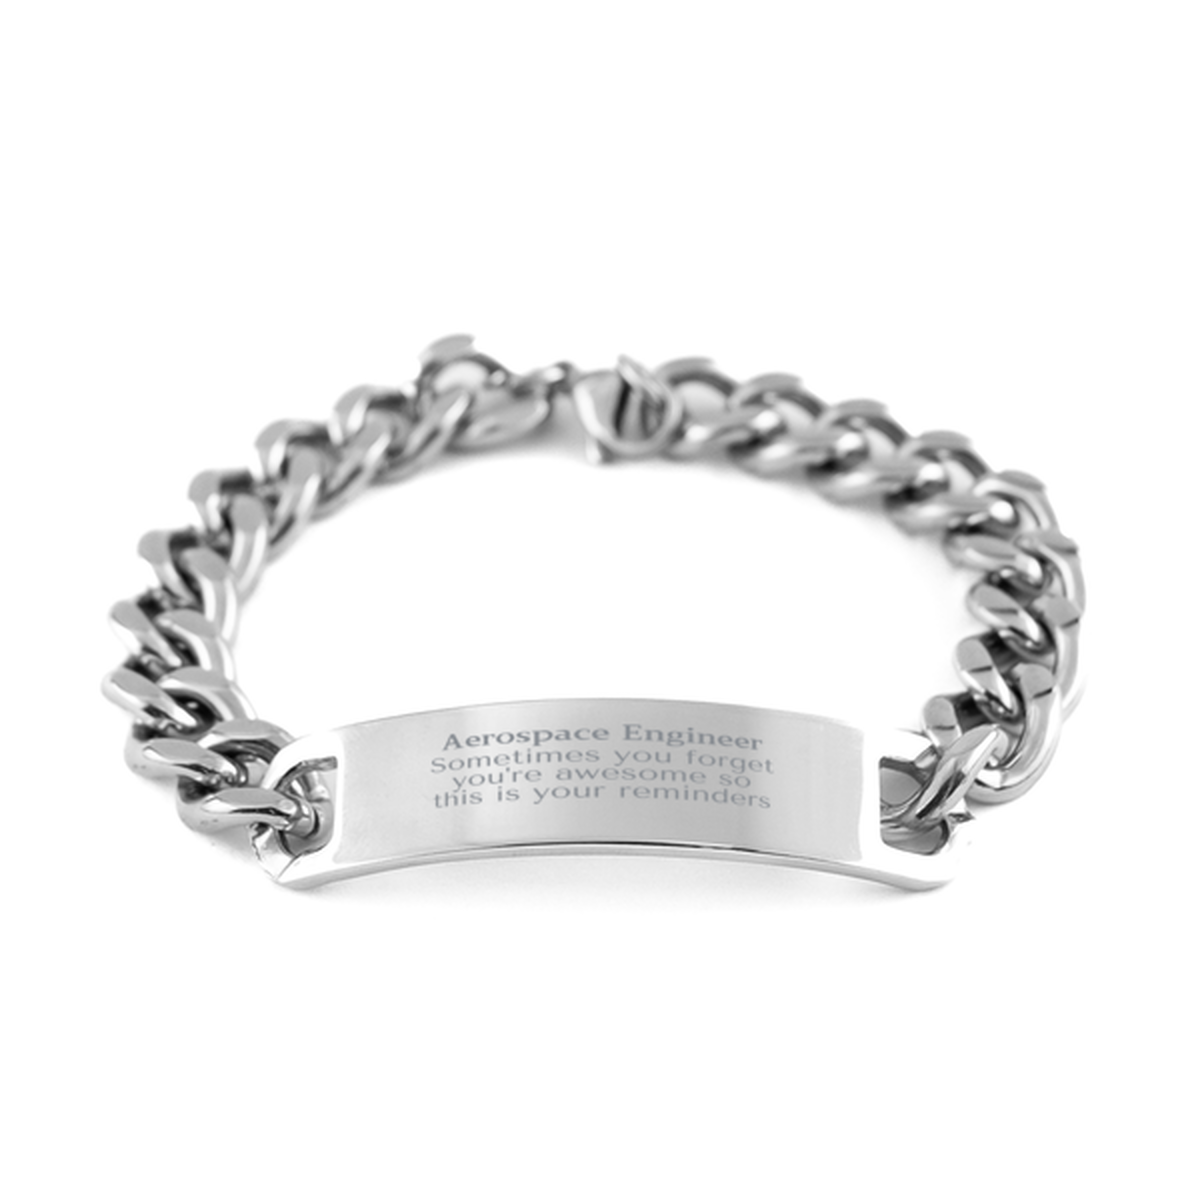 Sentimental Aerospace Engineer Cuban Chain Stainless Steel Bracelet, Aerospace Engineer Sometimes you forget you're awesome so this is your reminders, Graduation Christmas Birthday Gifts for Aerospace Engineer, Men, Women, Coworkers